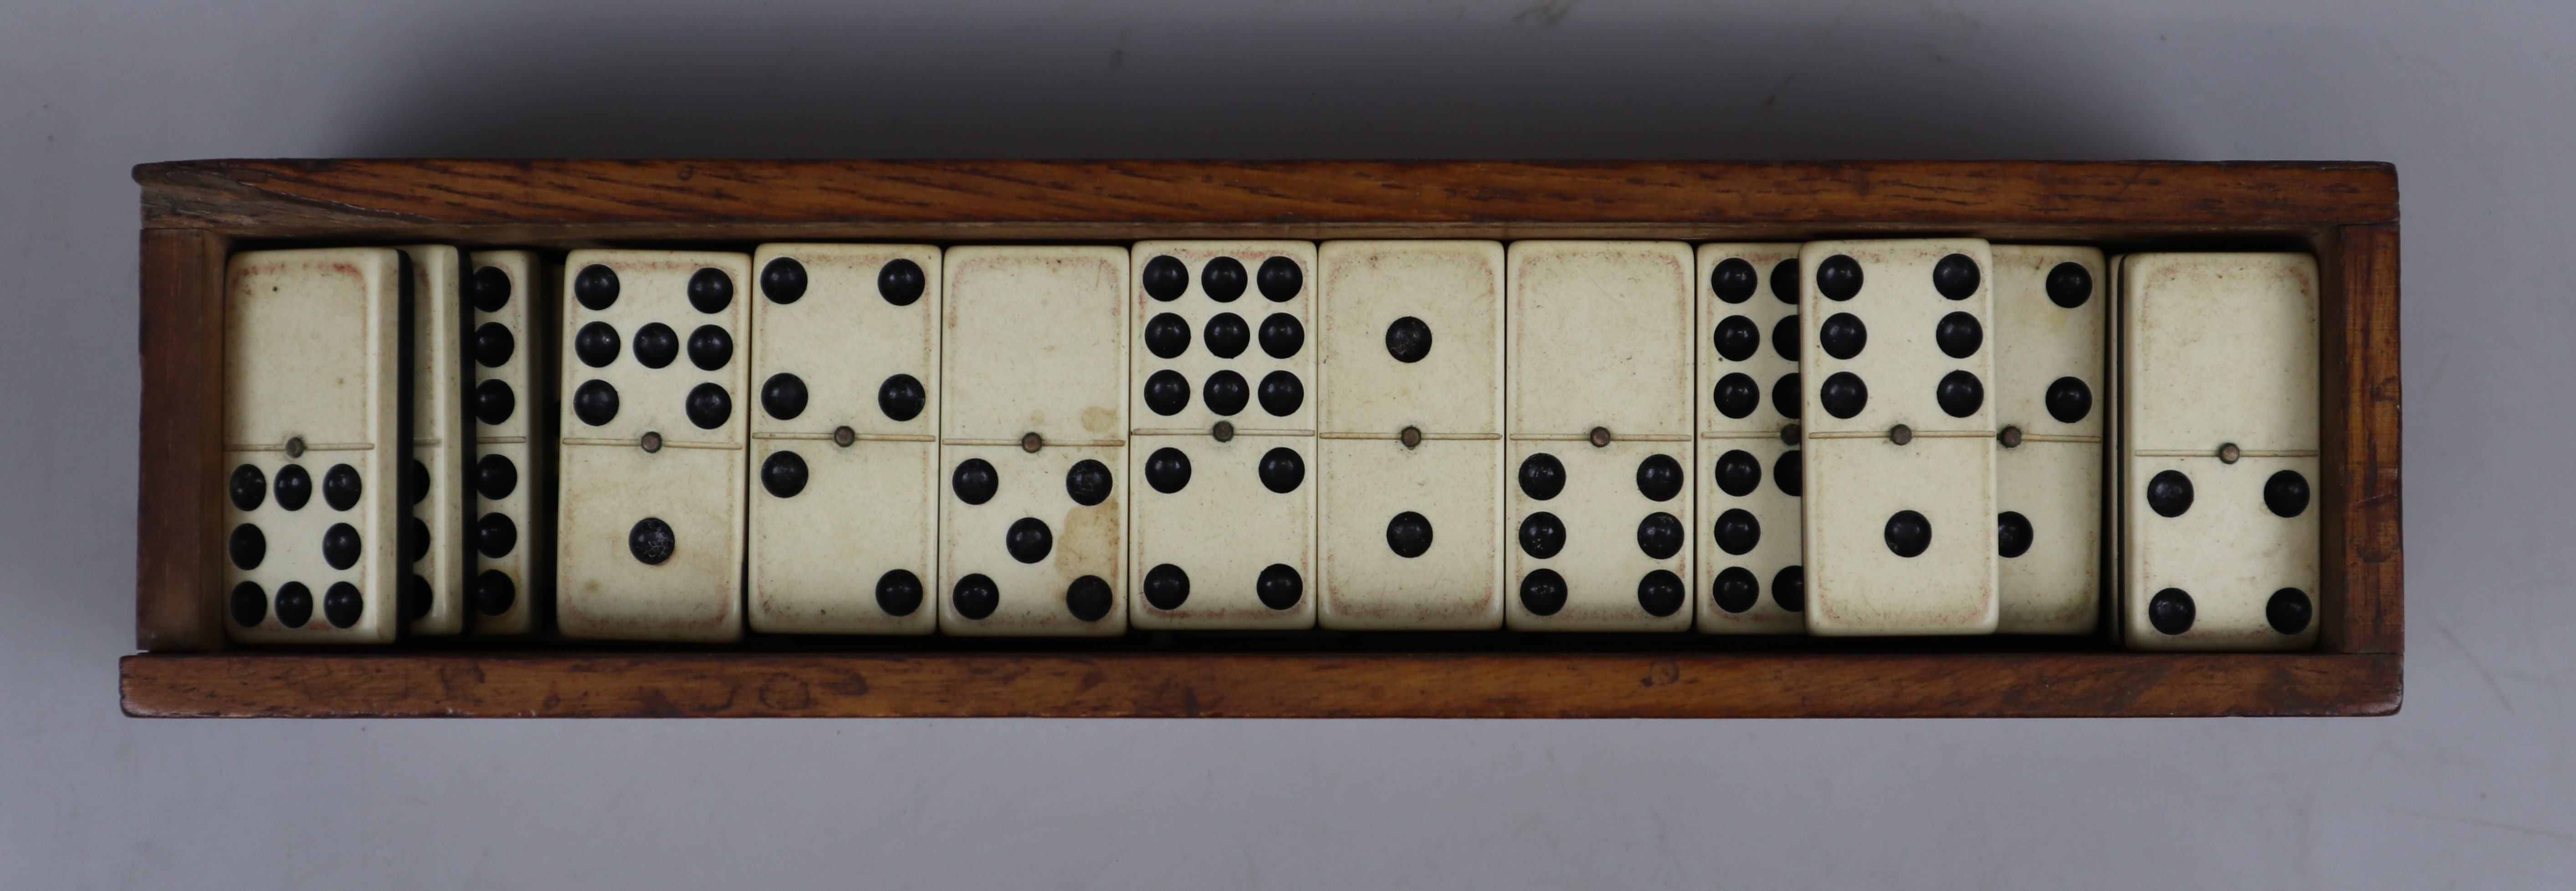 Dominoes set together with cribbage board - Image 2 of 2